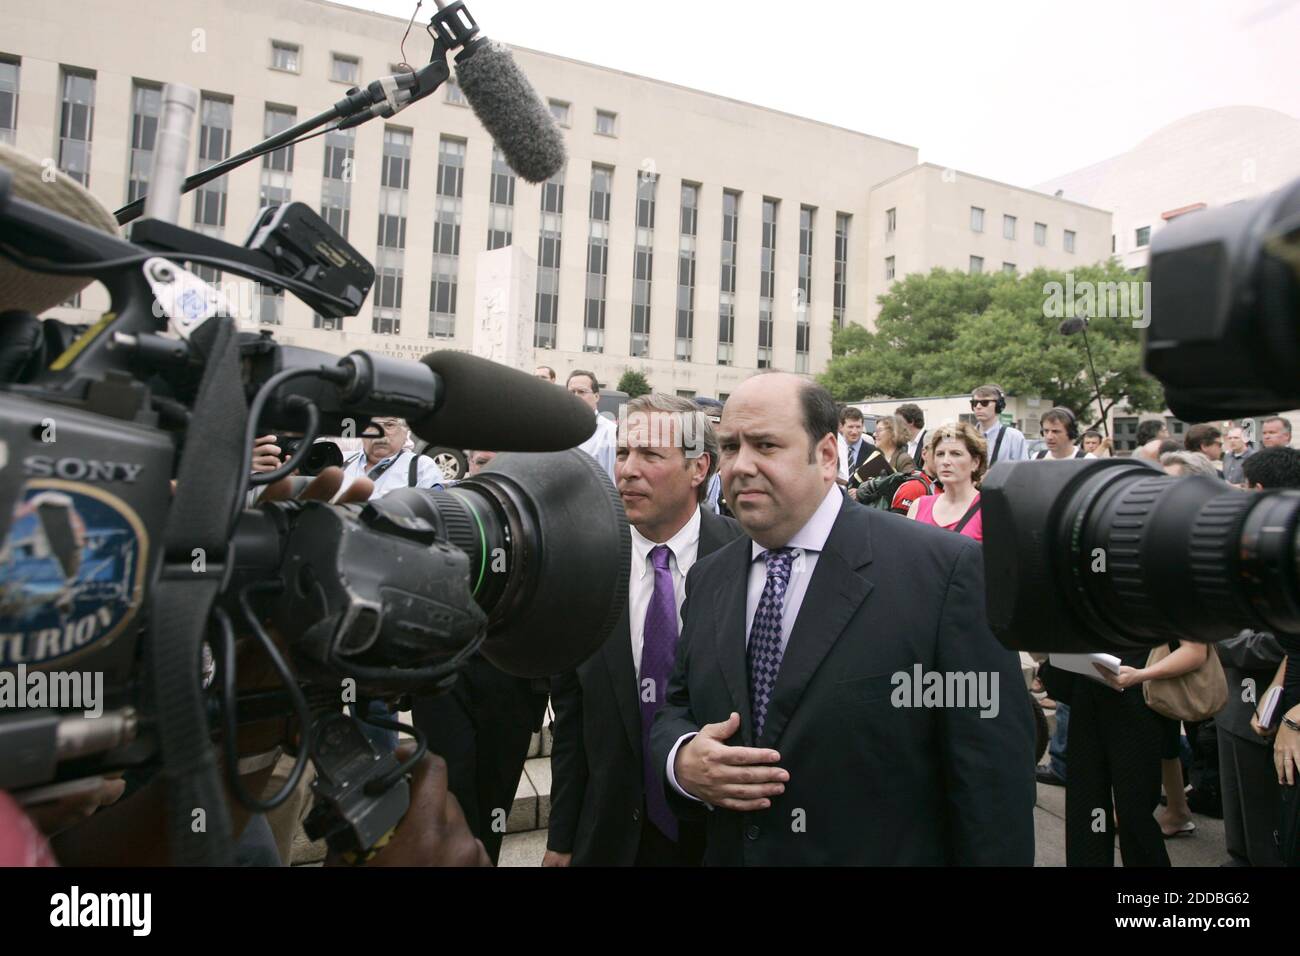 NO FILM, NO VIDEO, NO TV, NO DOCUMENTARY - Time magazine reporter Matt Cooper departs Federal Court in Washington, D.C., Wednesday, July 6, 2005. He and Judith Miller, of the New York Times, appeared in court for contempt of court for refusing to divulge their sources who identified Valerie Plame as a CIA operative. Photo by Chuck Kennedy/KRT/ABACAPRESS.COM Stock Photo